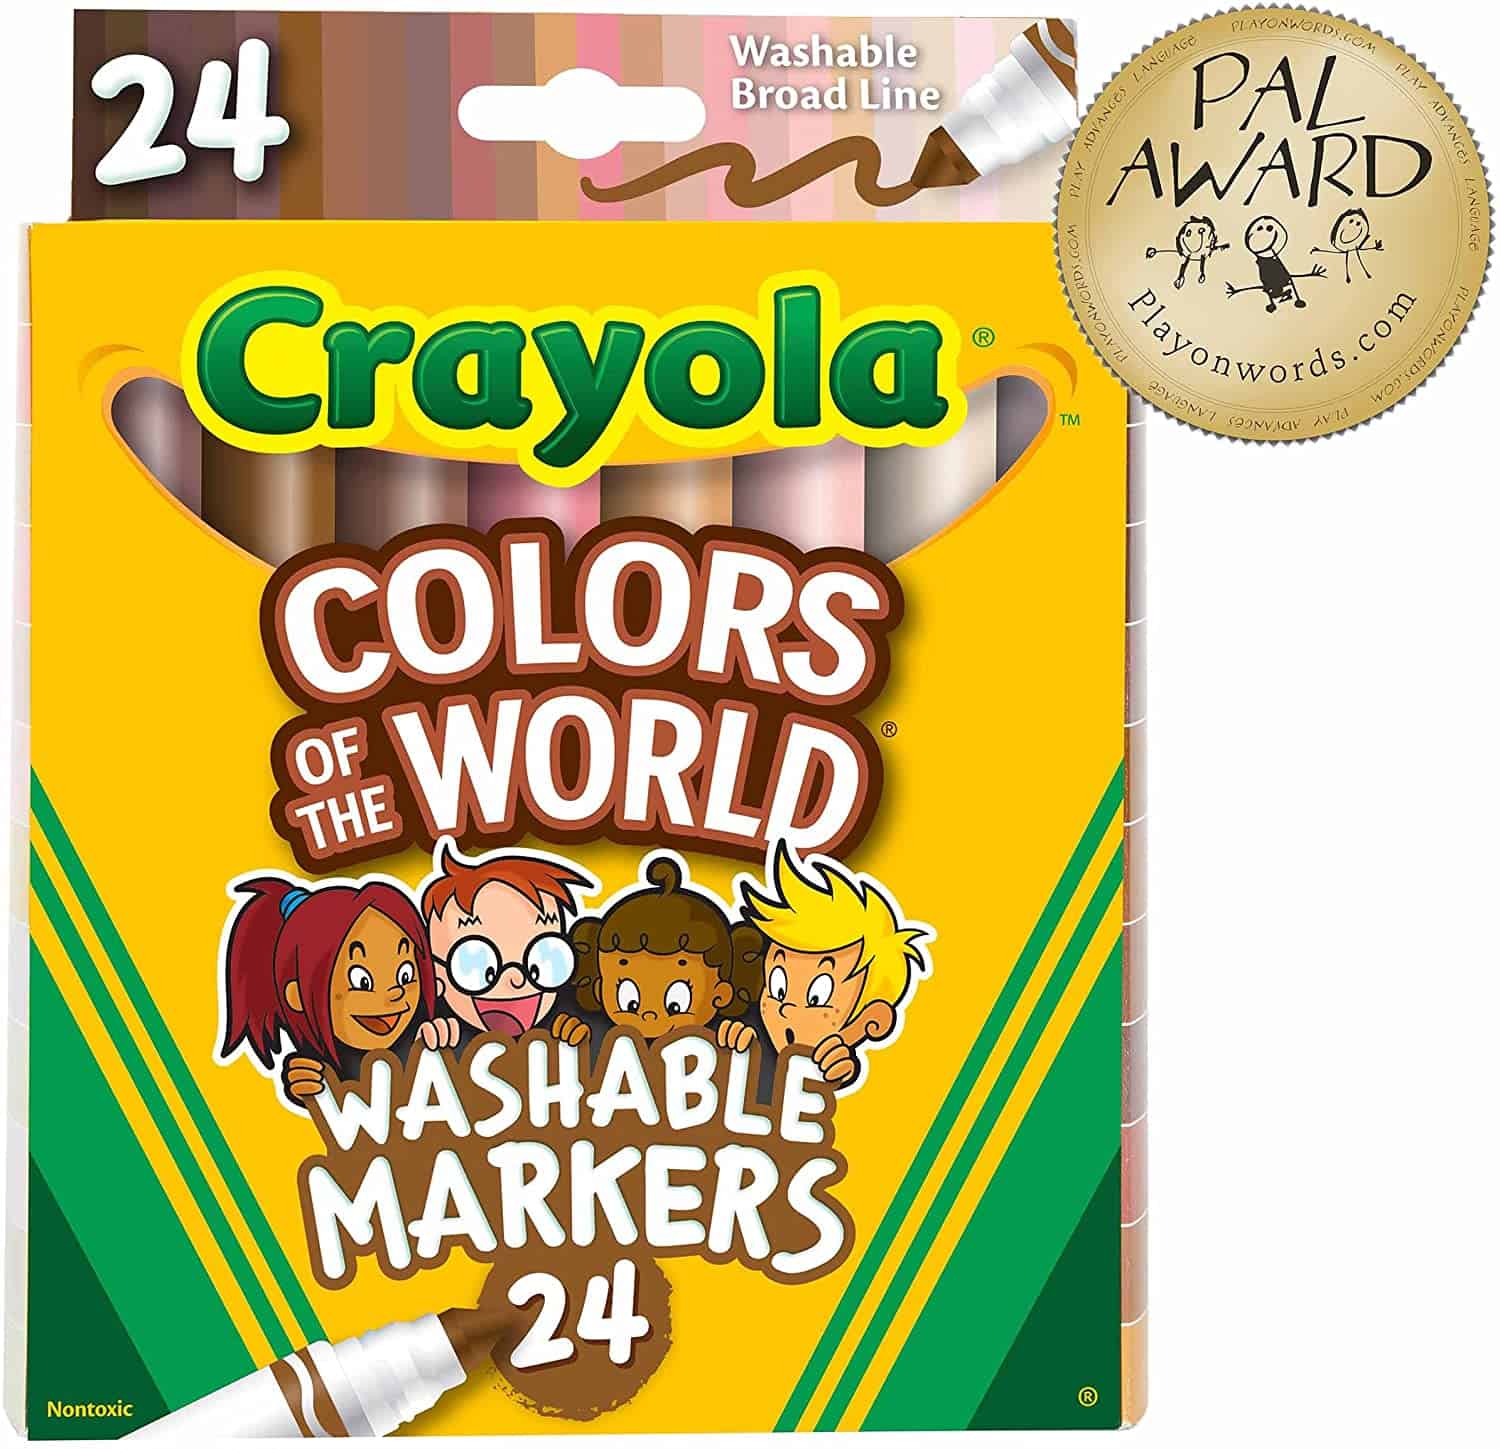 Best Creative Gift Ideas: Arts and Crafts for Kids 2023 - Imagination Soup